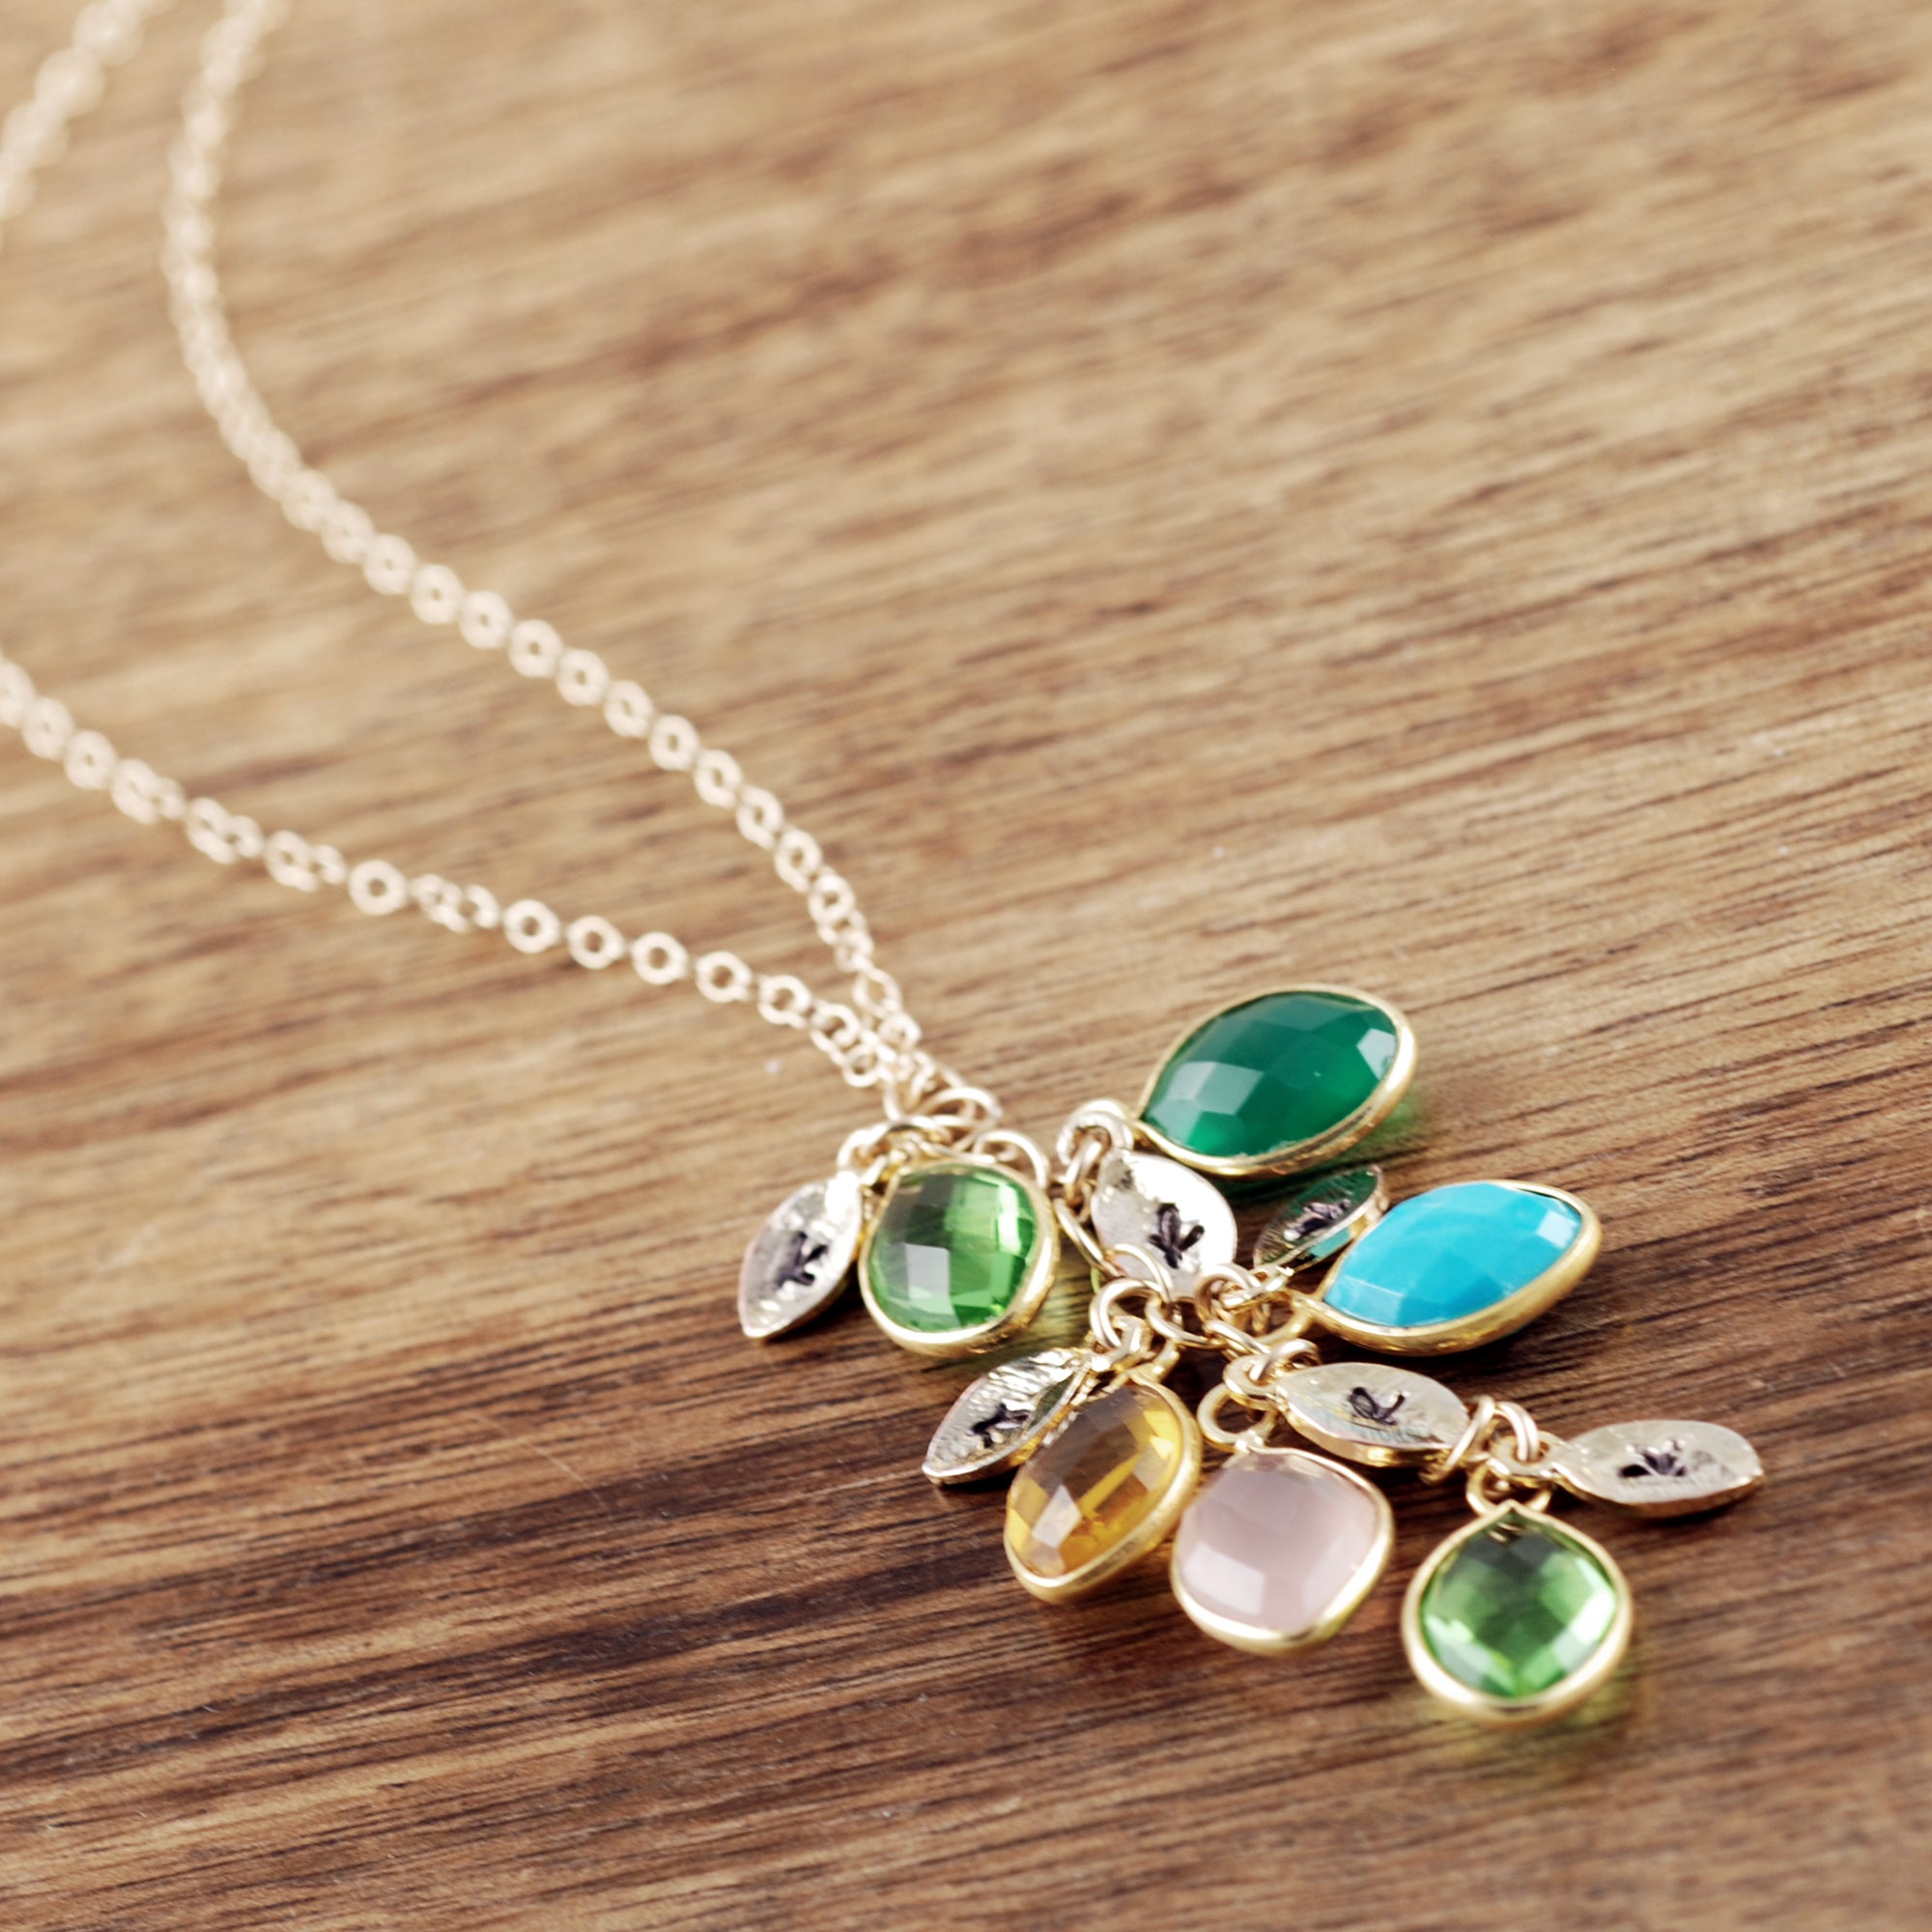 Birthstone Necklace with Initials